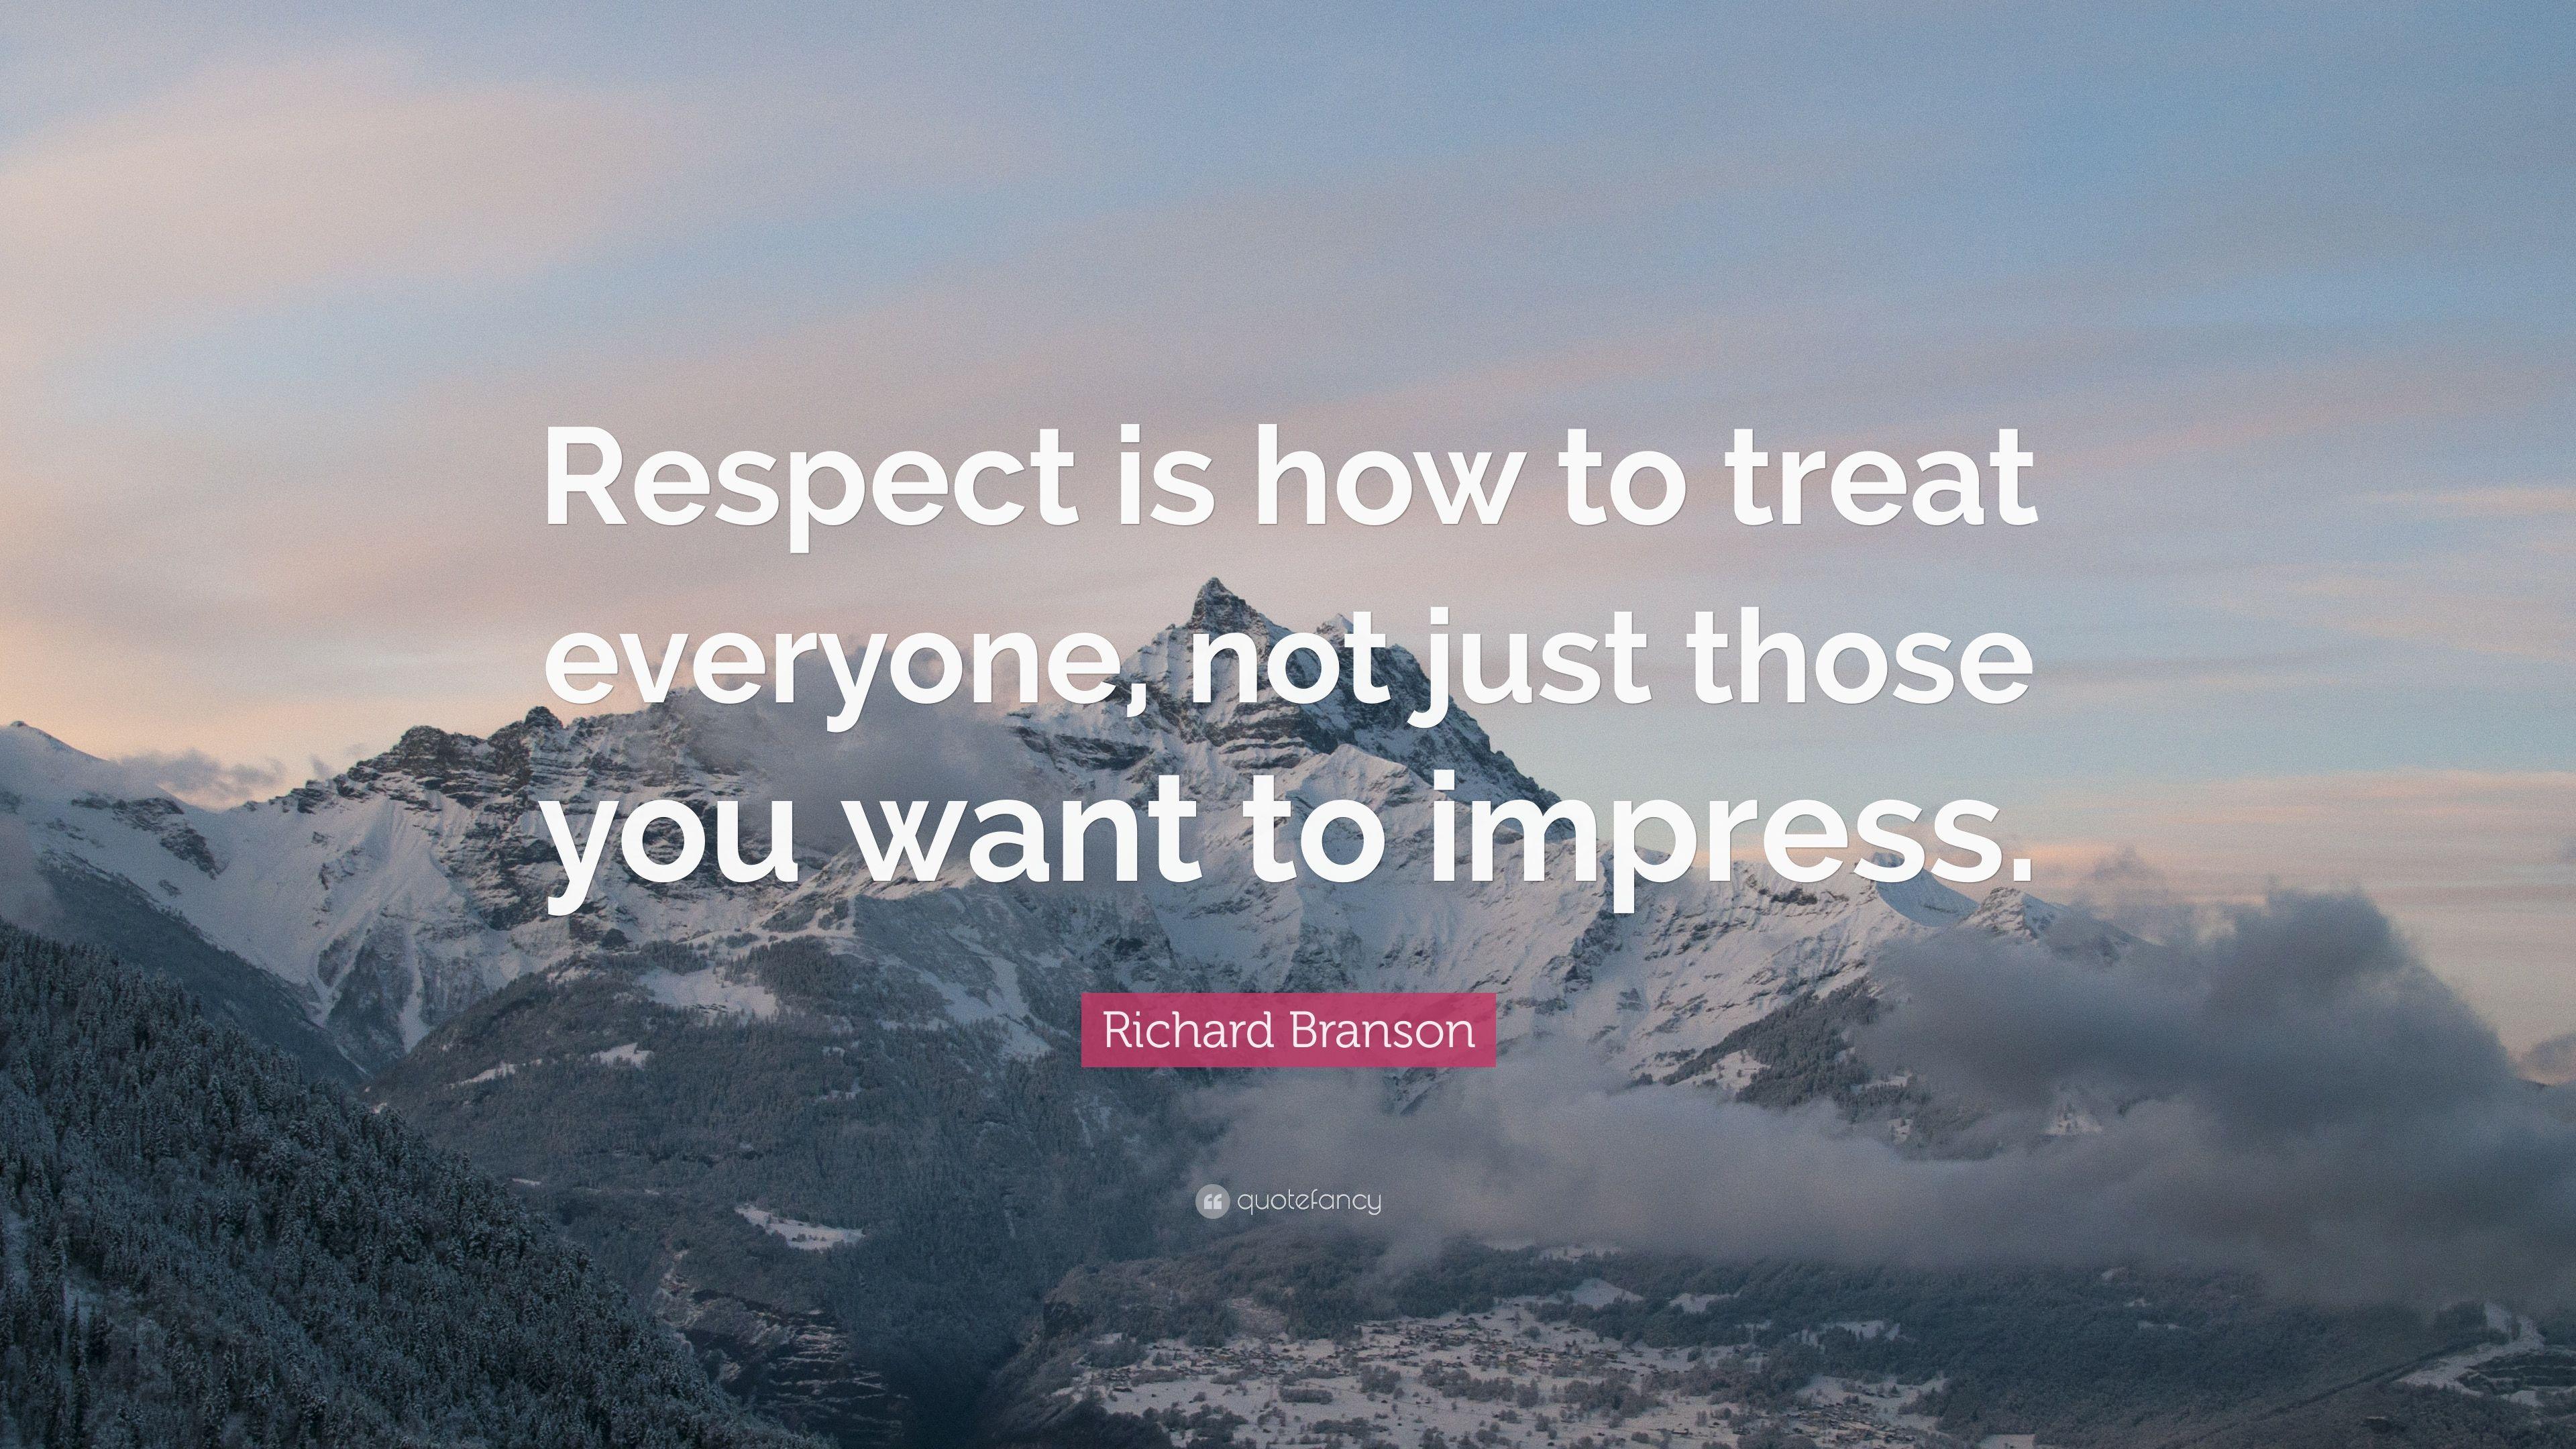 Richard Branson Quote: “Respect is how to treat everyone, not just